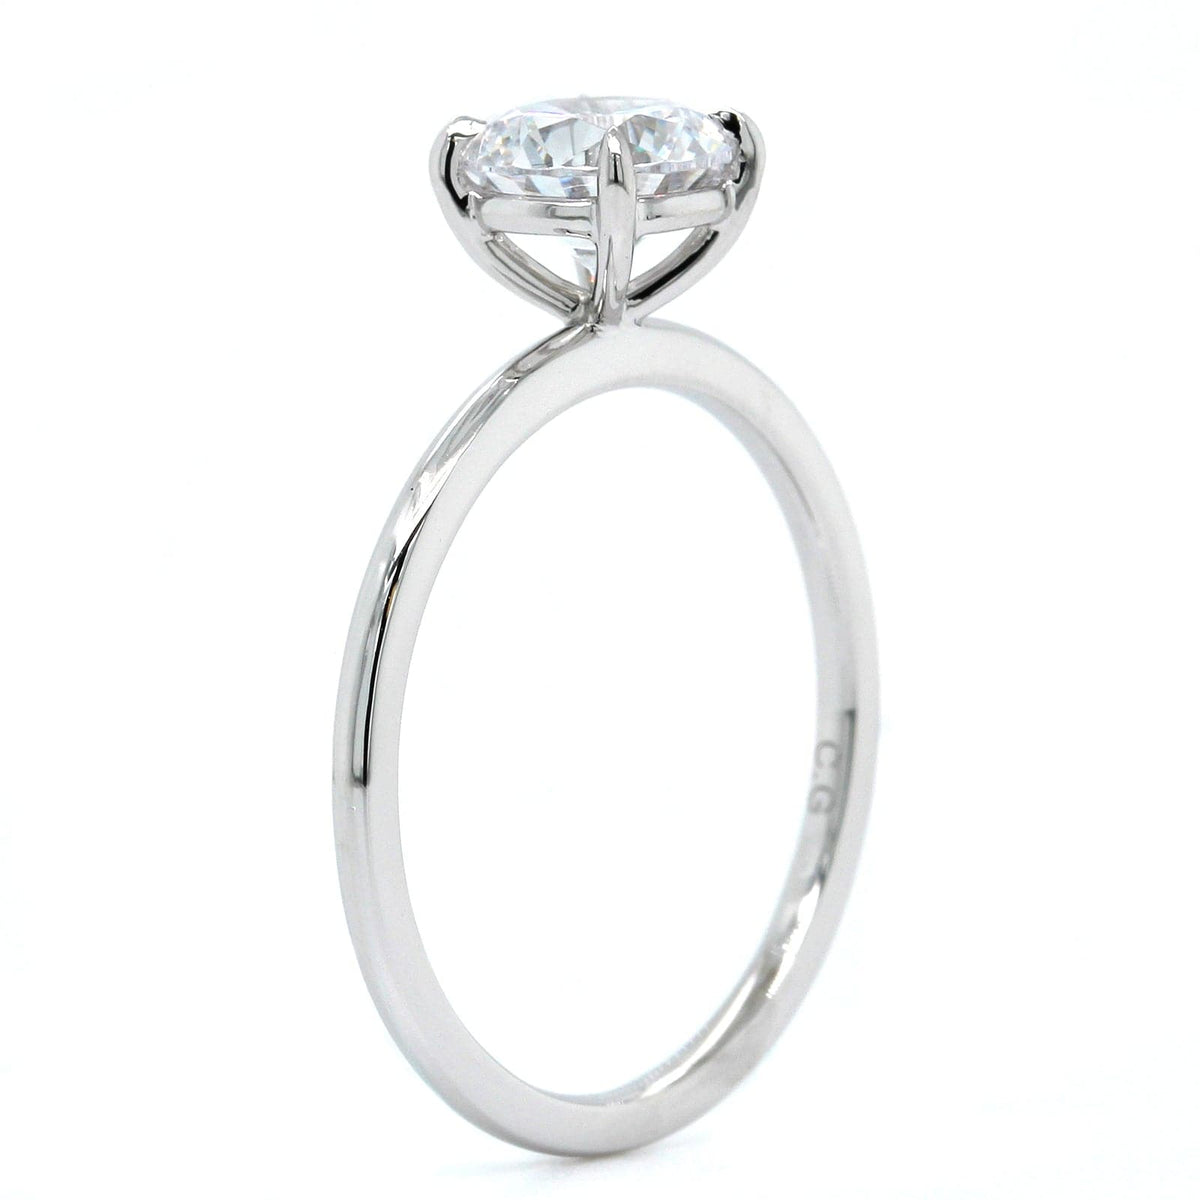 Platinum Round 4 Prong Solitaire Engagement Ring Setting, Platinum, Long's Jewelers